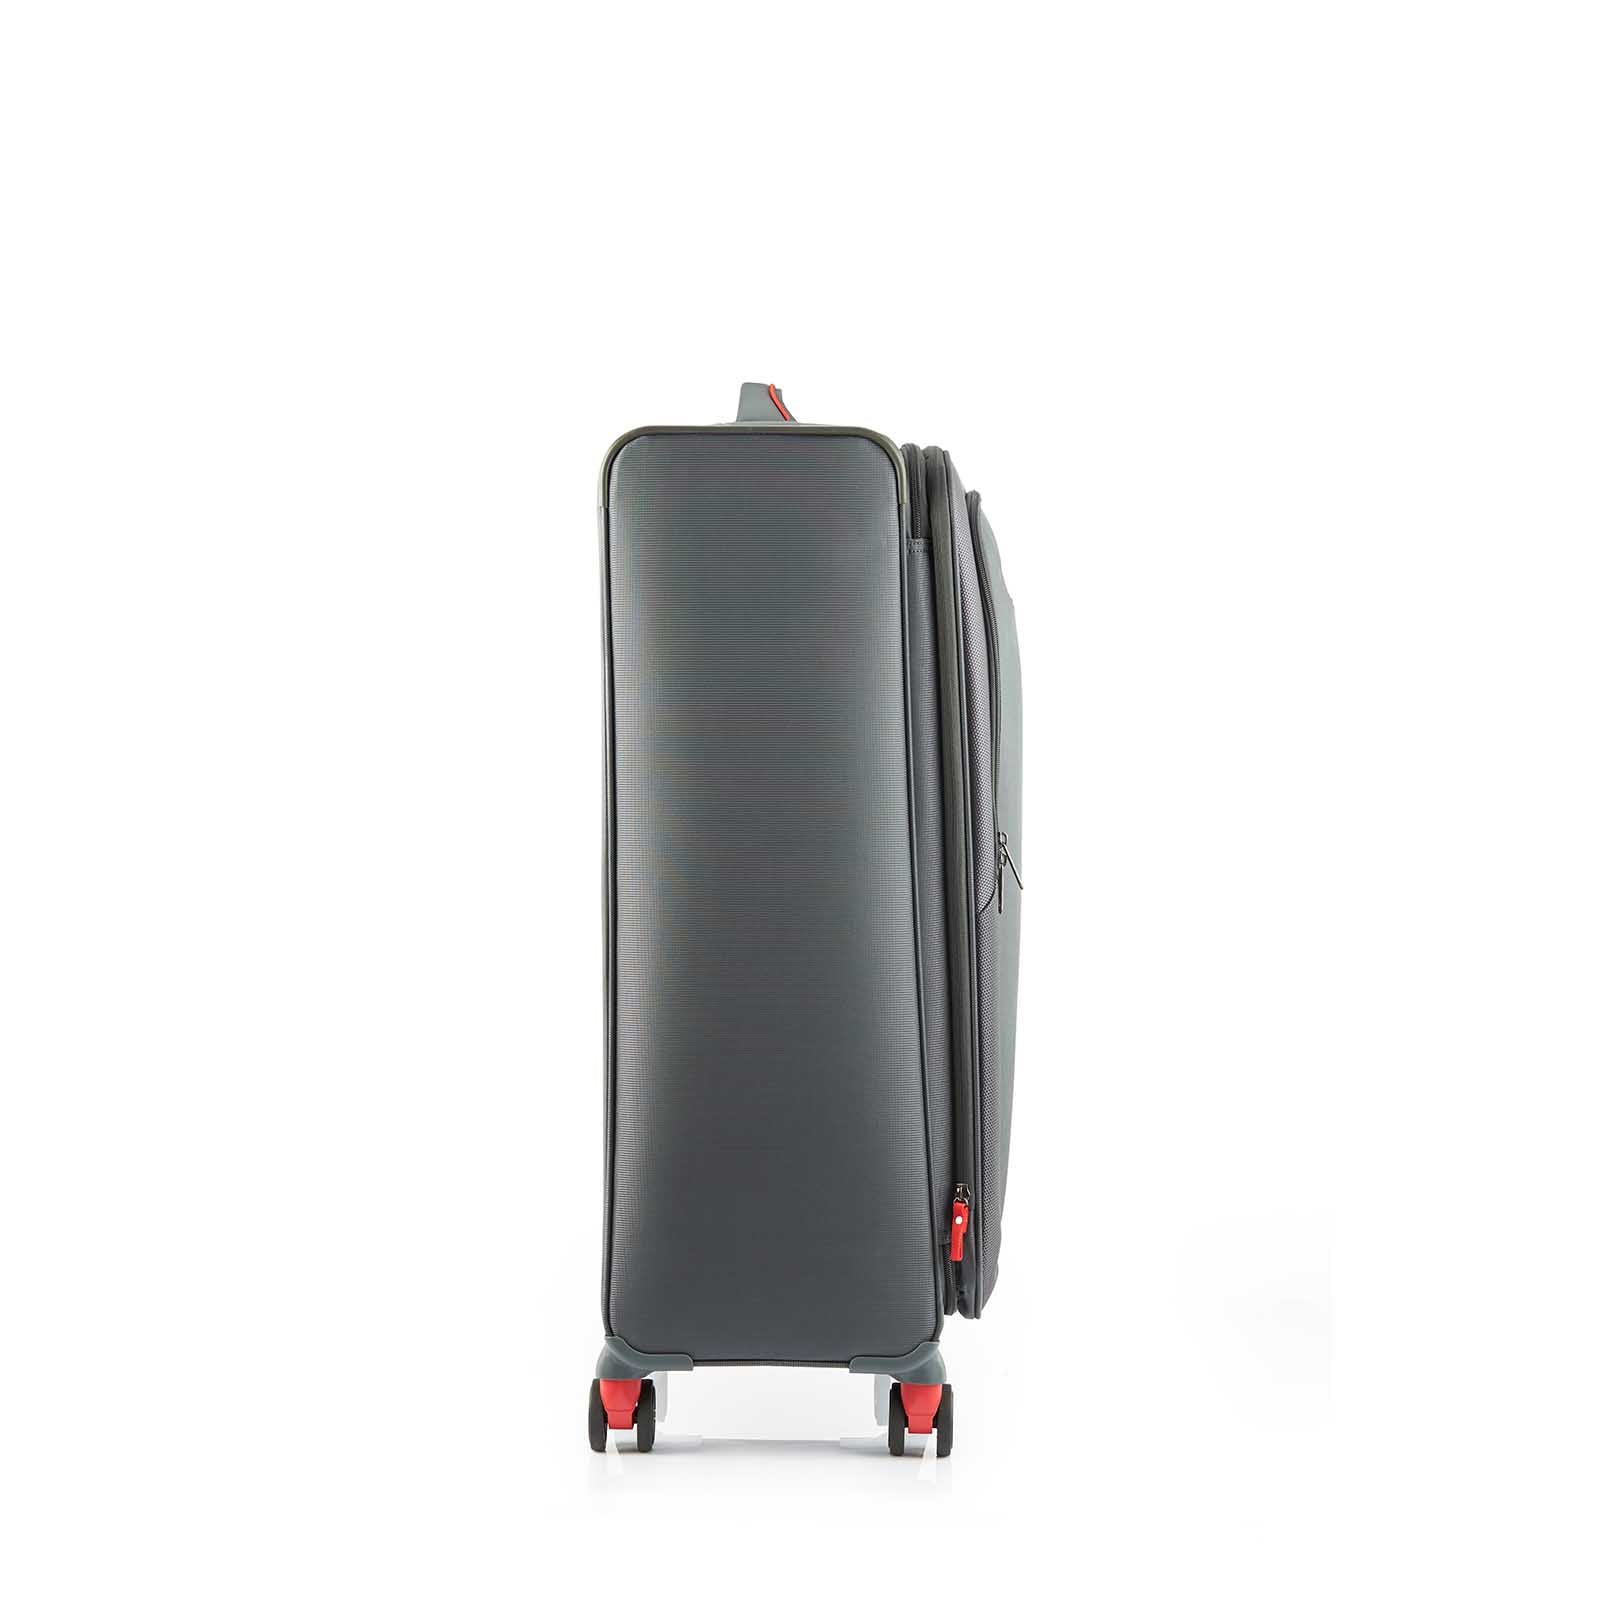 American-Tourister-Applite-4-Eco-82cm-Suitcase-Grey-Red-Side-LH